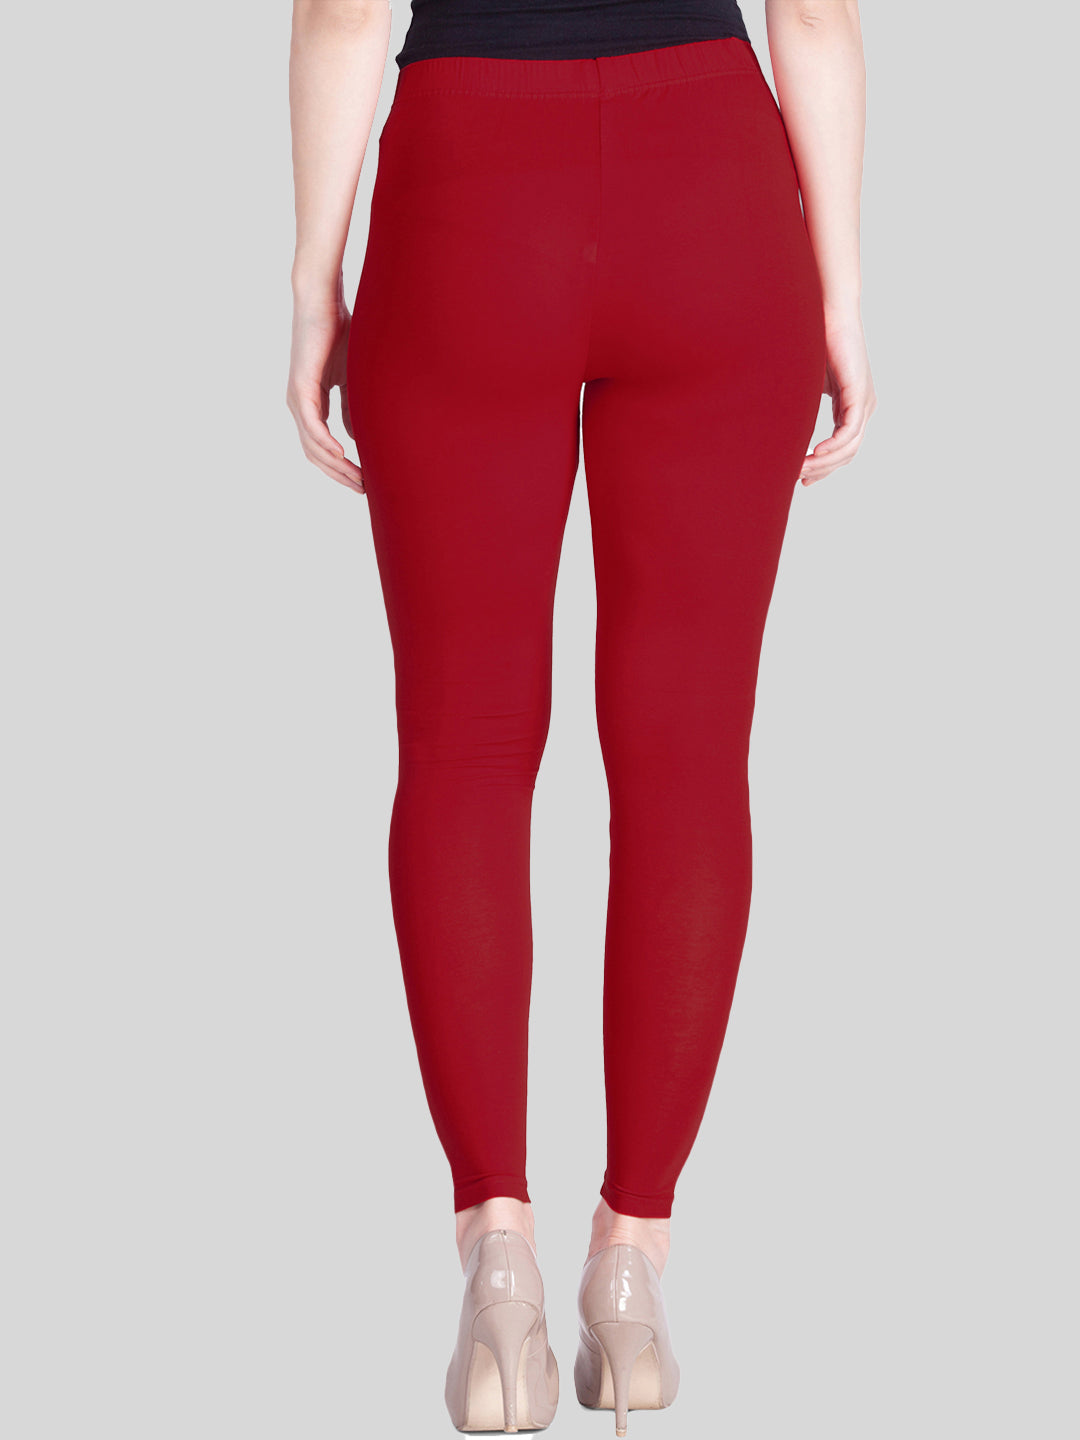 Buy Comfort Lady Women's Cotton Ankle Length Leggings Combo (Pack of 2 RED, WHITE)-Free Size at